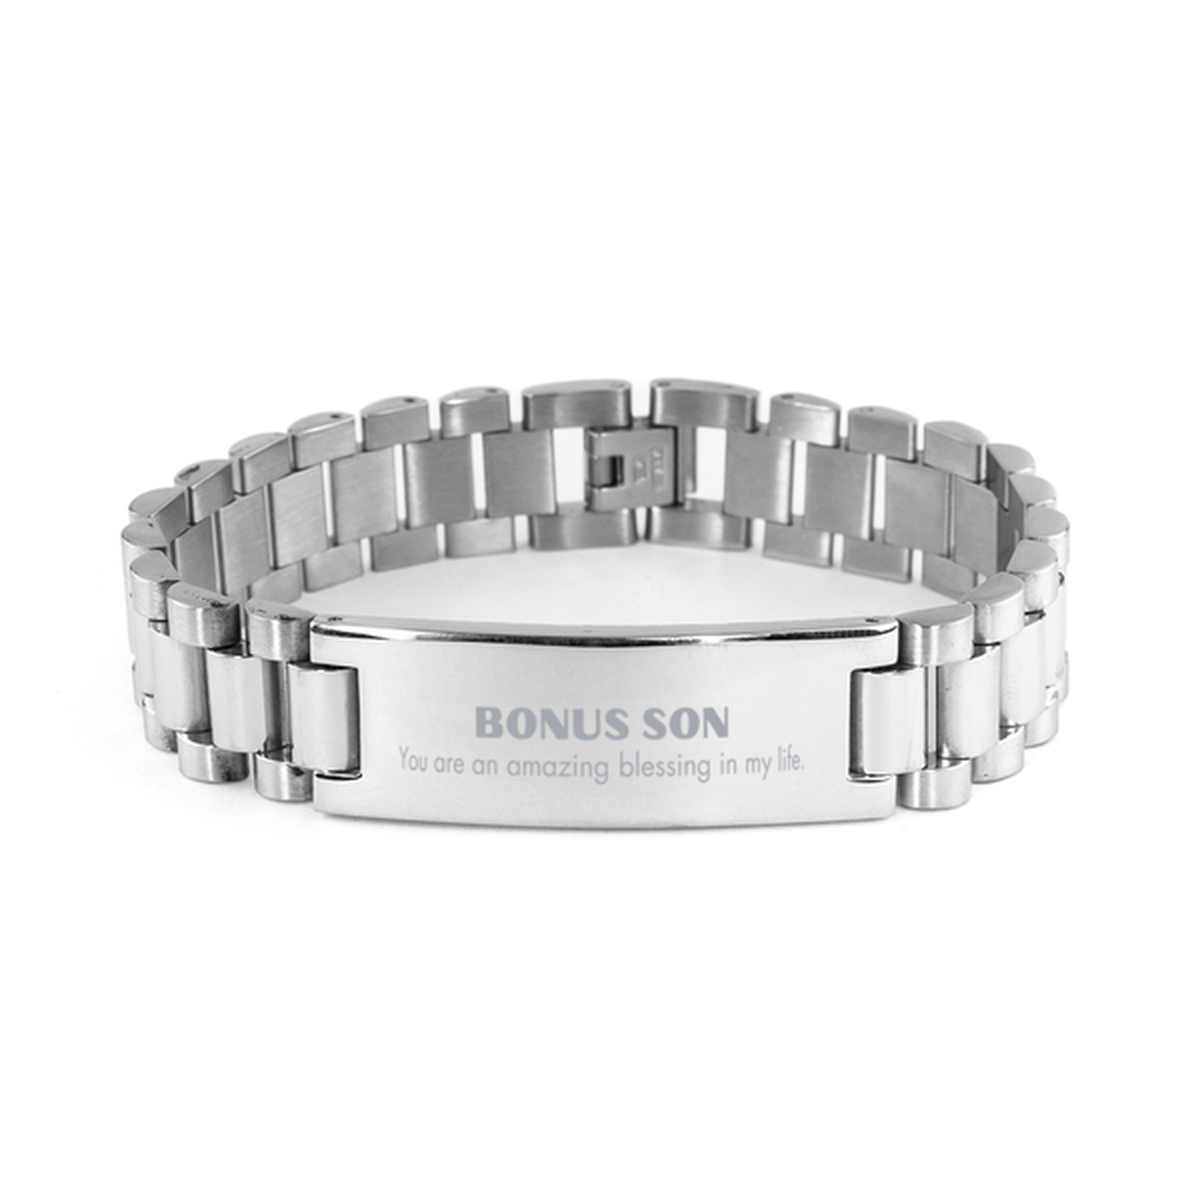 Bonus Son Ladder Stainless Steel Bracelet, You are an amazing blessing in my life, Thank You Gifts For Bonus Son, Inspirational Birthday Christmas Unique Gifts For Bonus Son